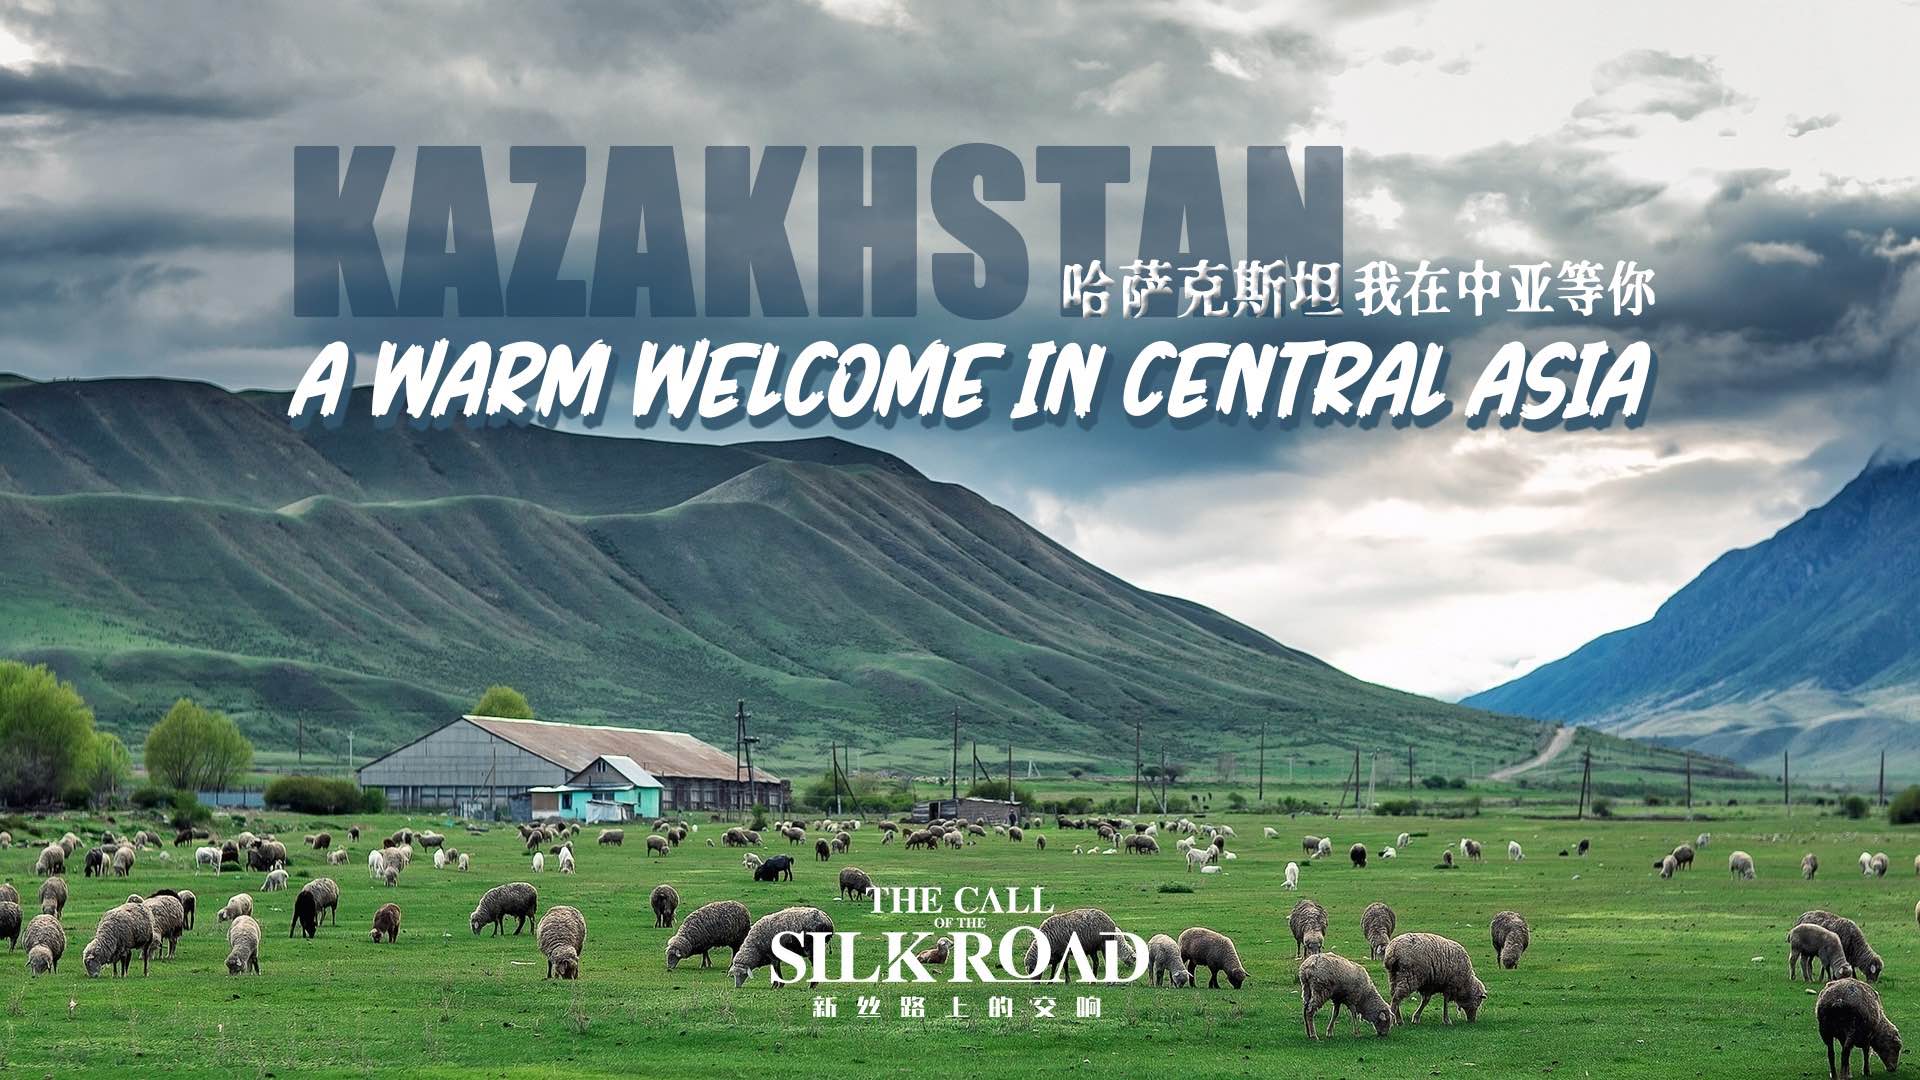 Kazakhstan: A warm welcome in Central Asia